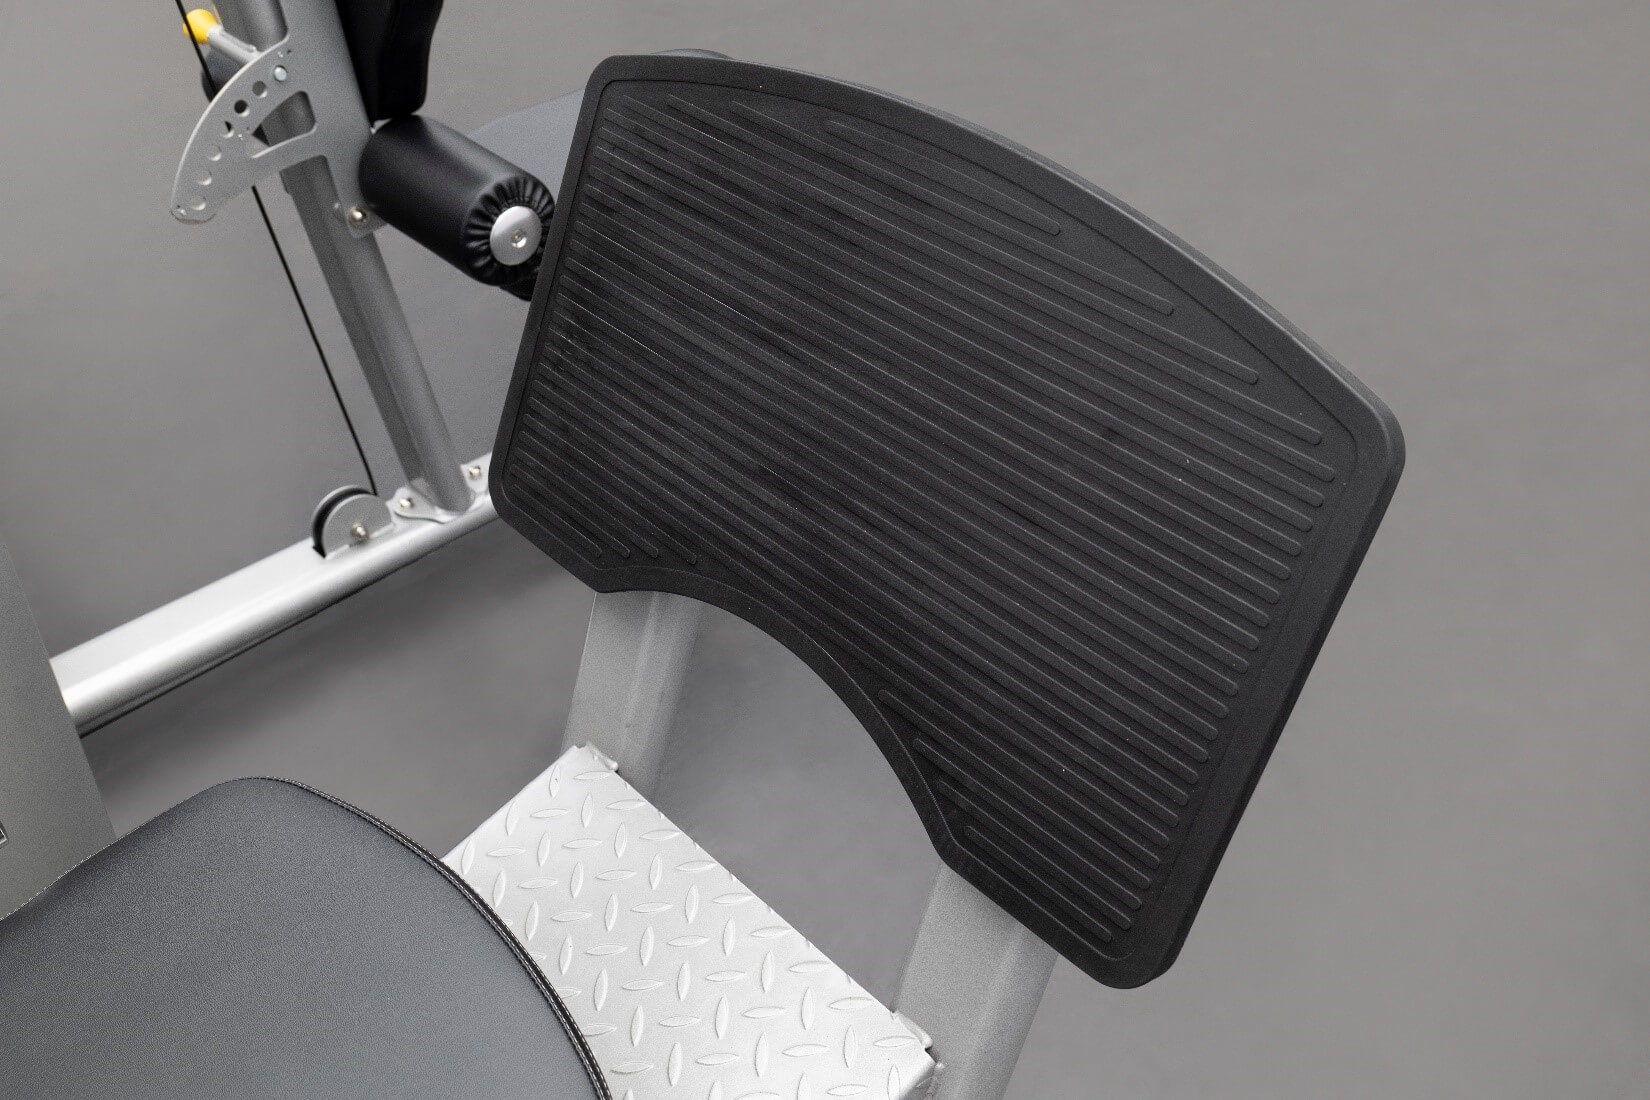 Leg Press foot plate is wide with rubber coating